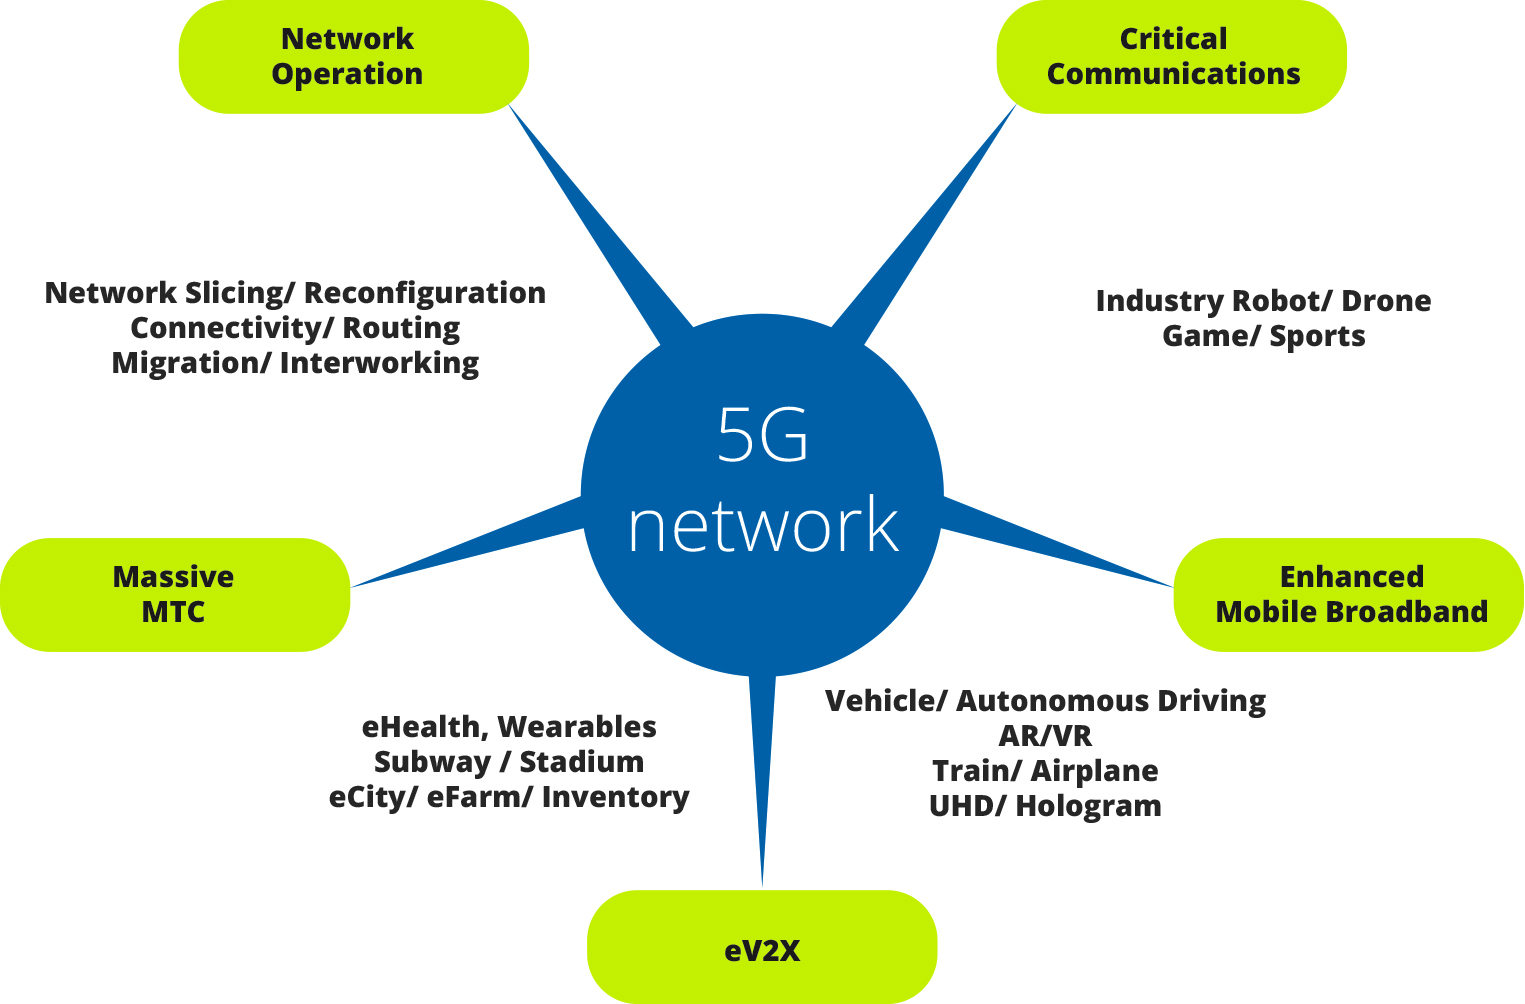 research topics in 5g networks